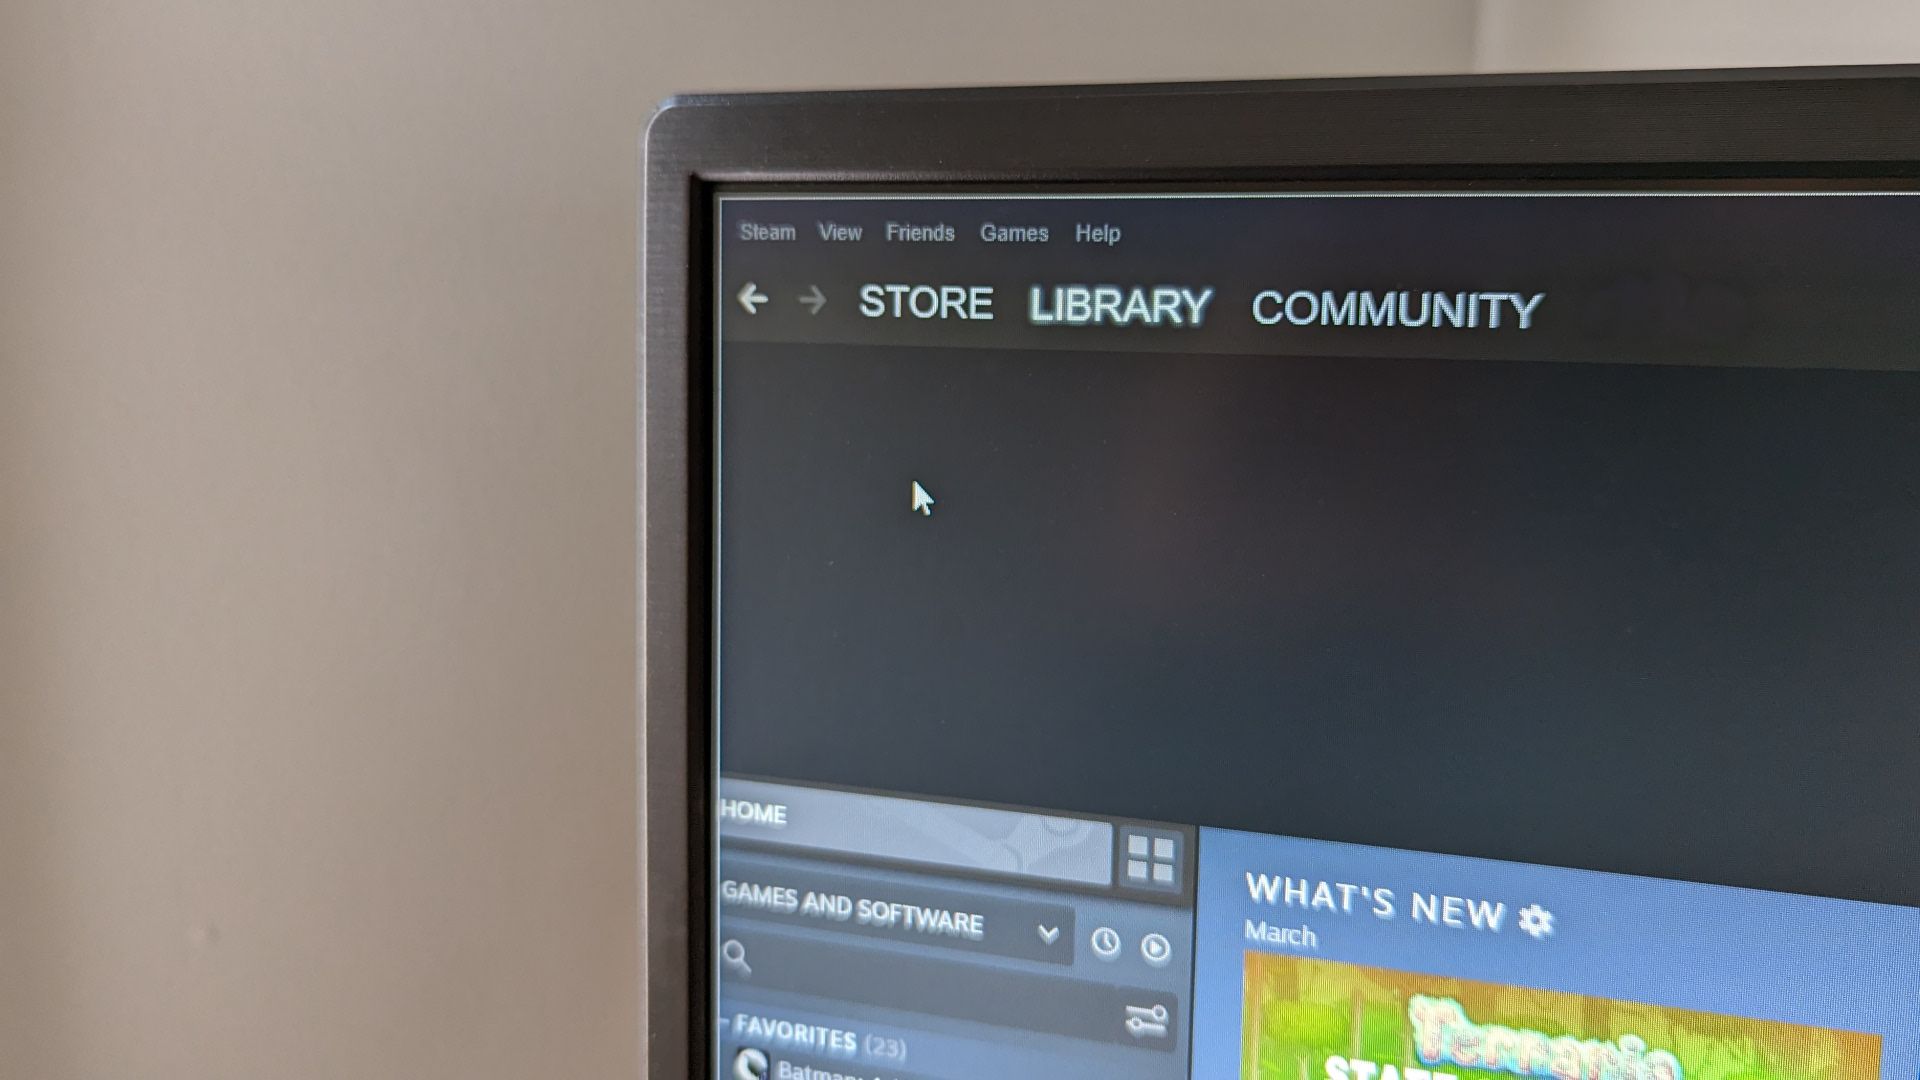 Steam library open on a computer monitor with the library disappearing.